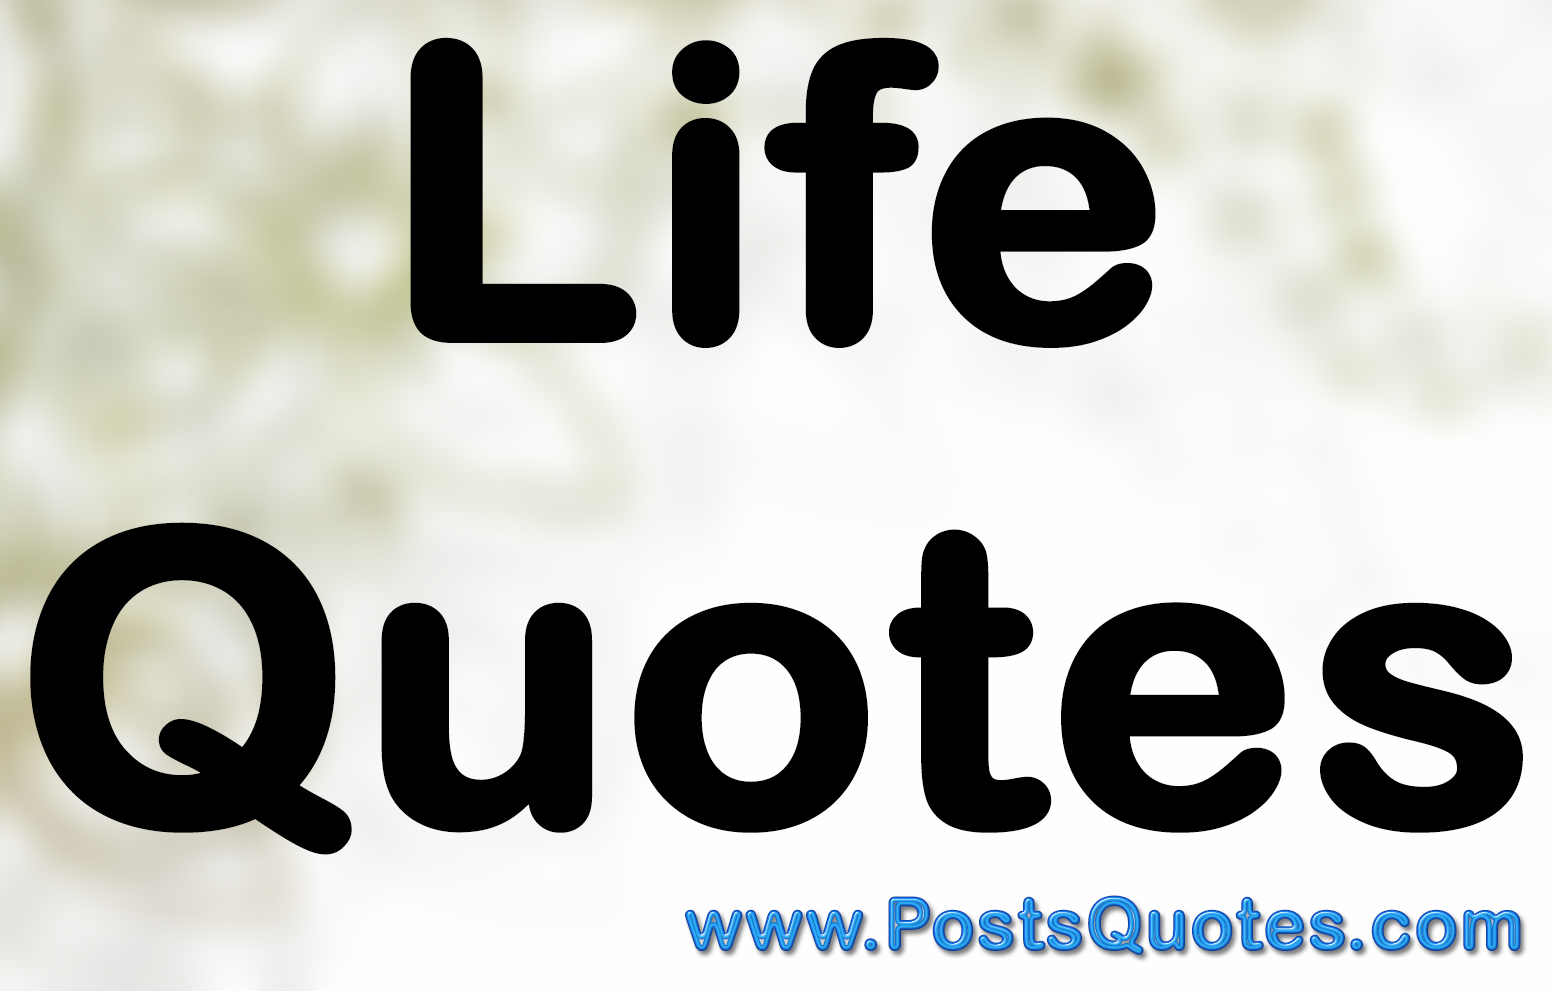 Life Quotes - Posts Quotes